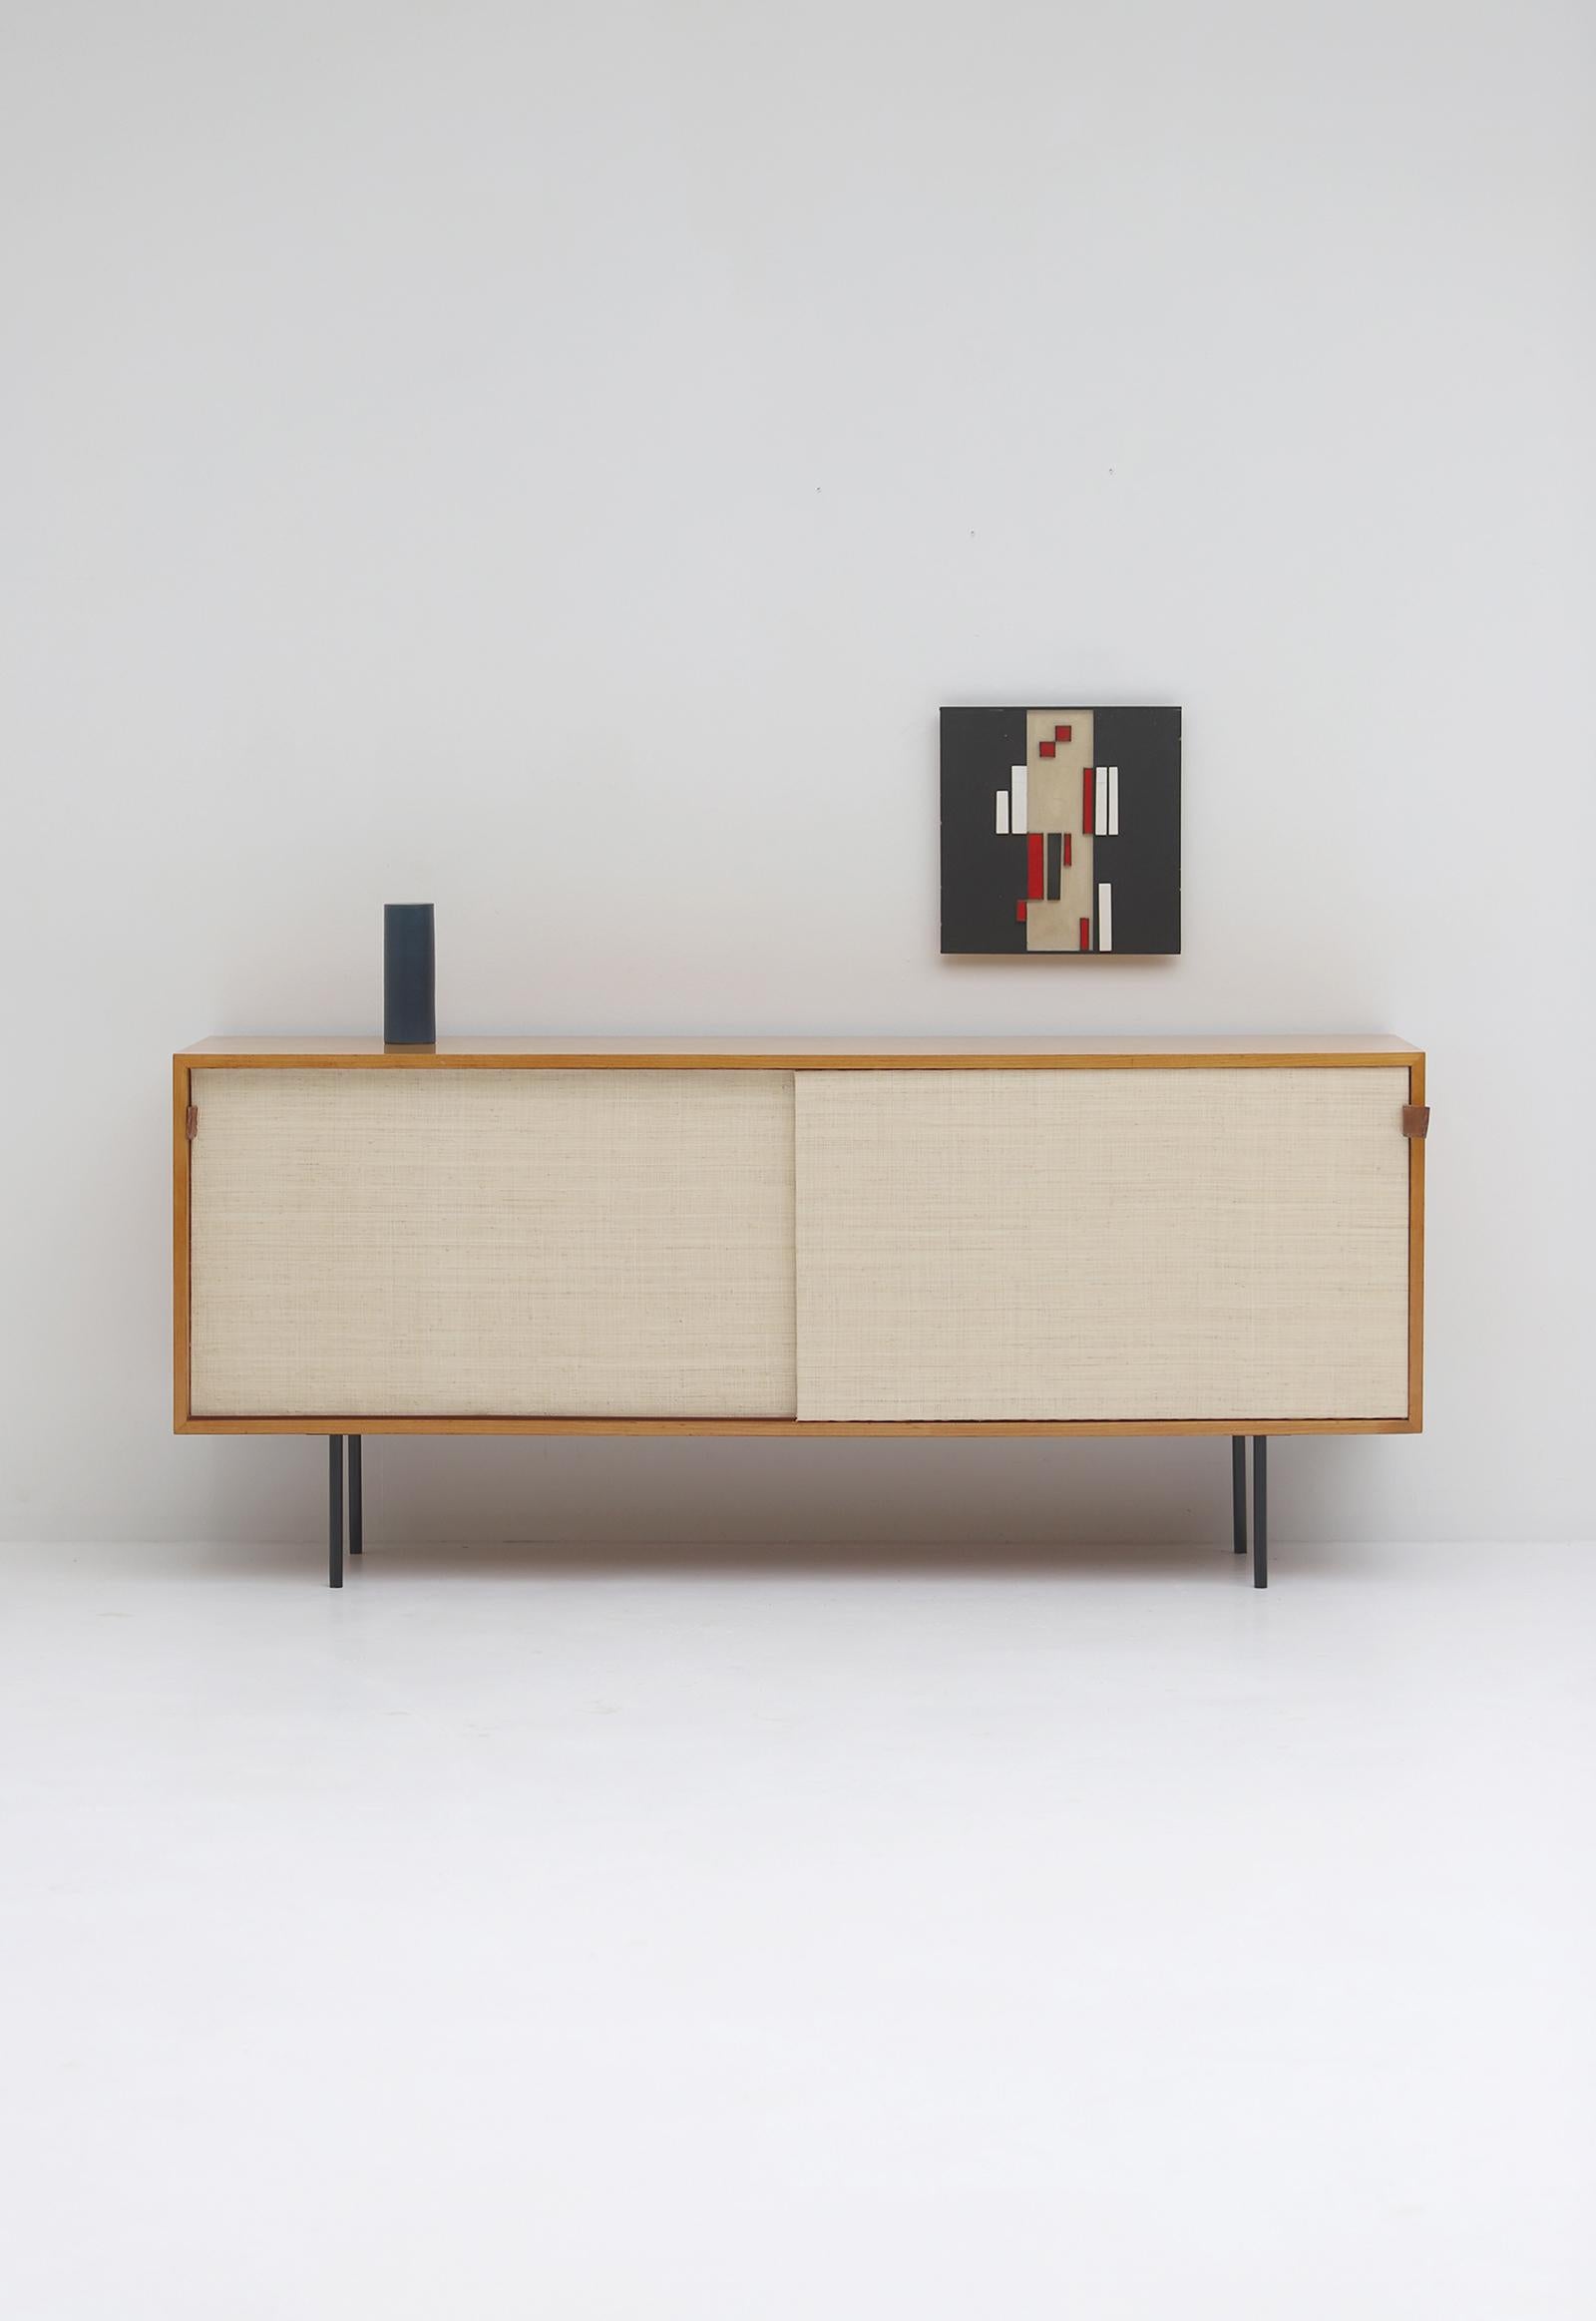 Decorative sideboard model 116 designed by Florence Knoll in the early fifties for Knoll associates. Florence Knoll studied architecture under Ludwig Mies van der Rohe and Eliel Saarinen before joining her husband in the company. Florence Knoll took